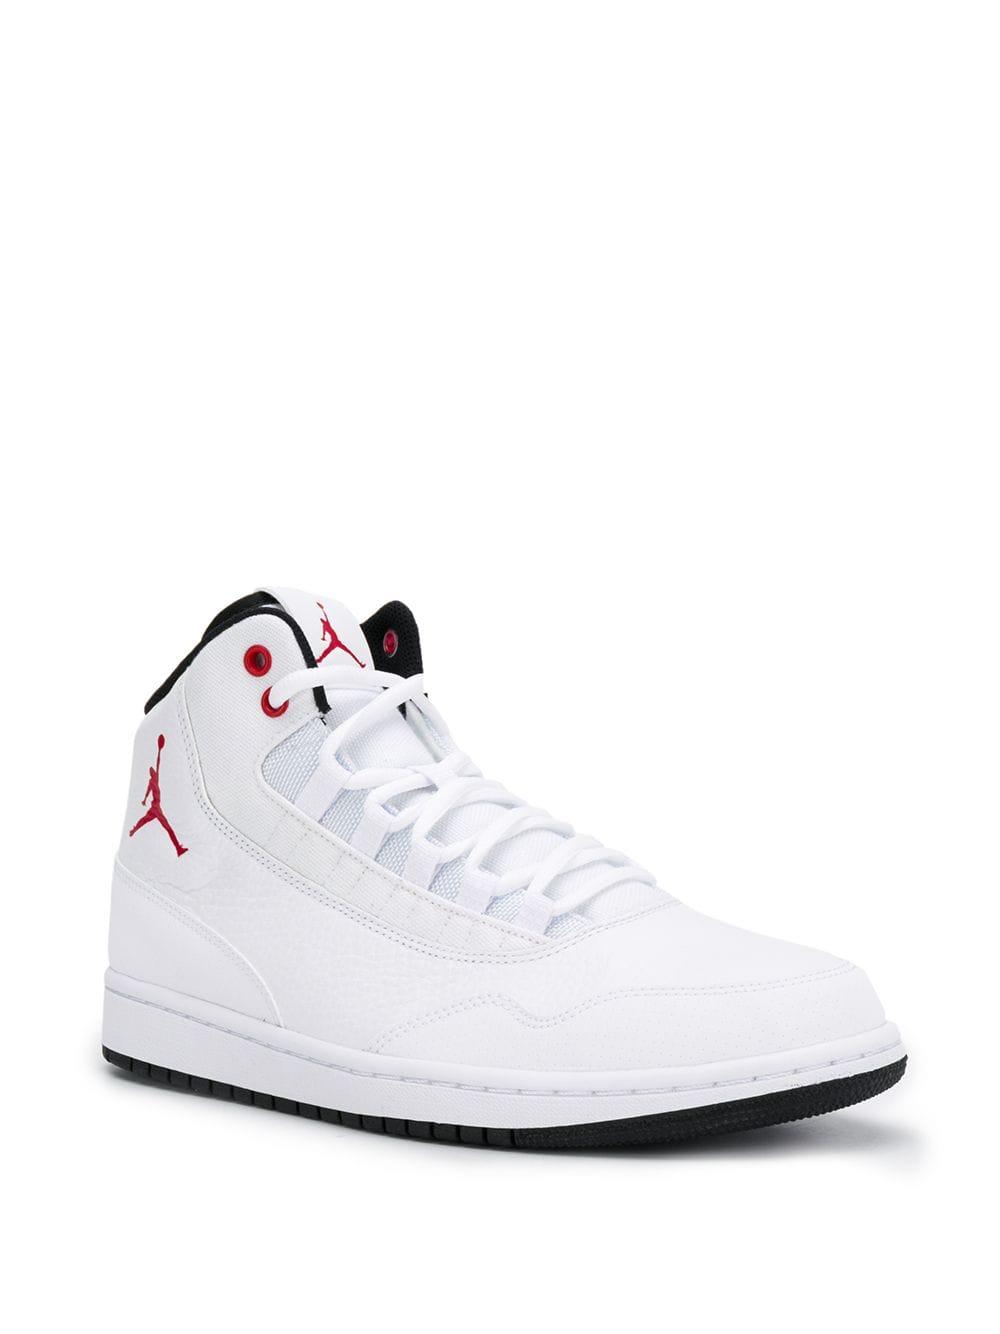 Nike Leather Jordan Executive Sneakers in White for - Lyst